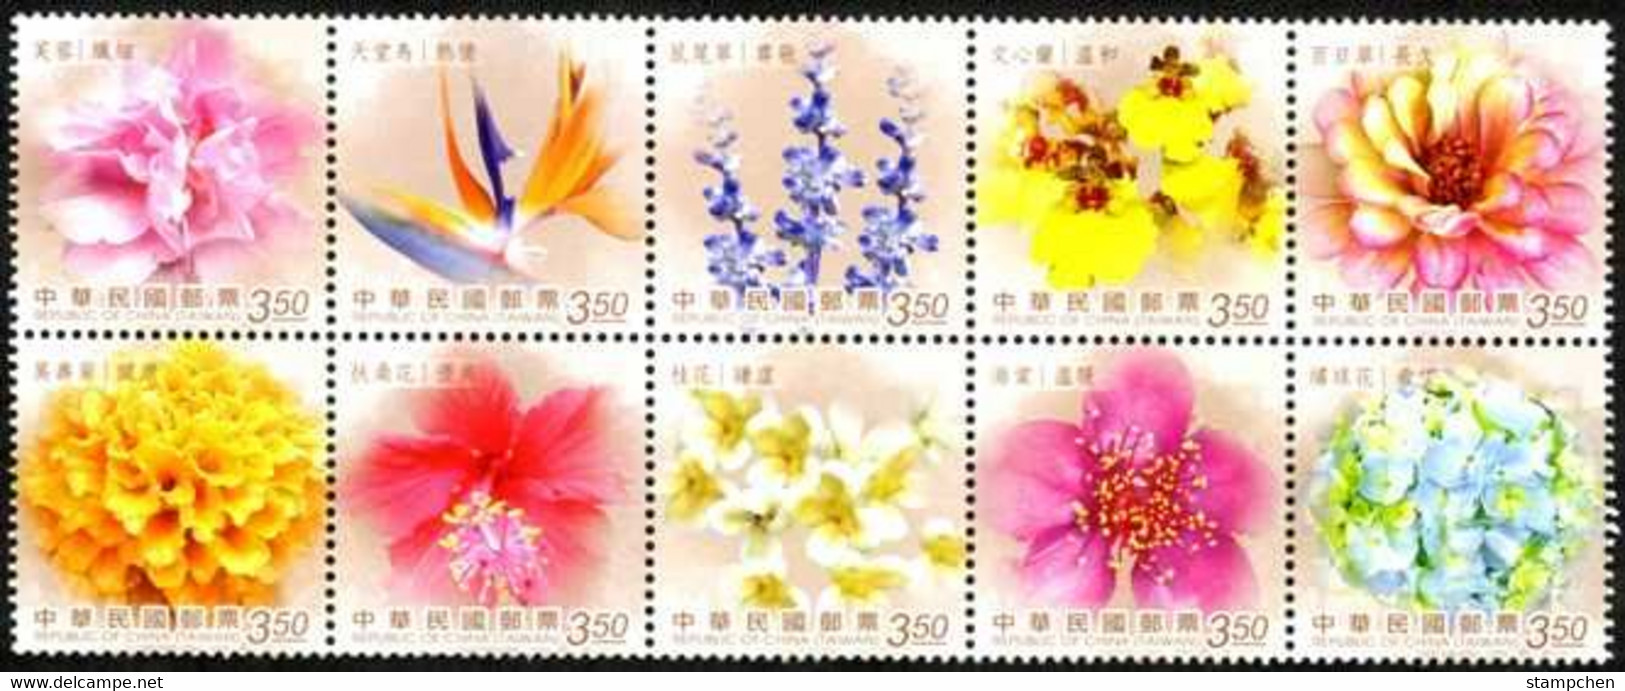 NT$3.50 Taiwan 2012 Greeting Stamps -Flower Language Cotton Rose Bird Of Paradise Orchid Hibiscus Olive - Unused Stamps